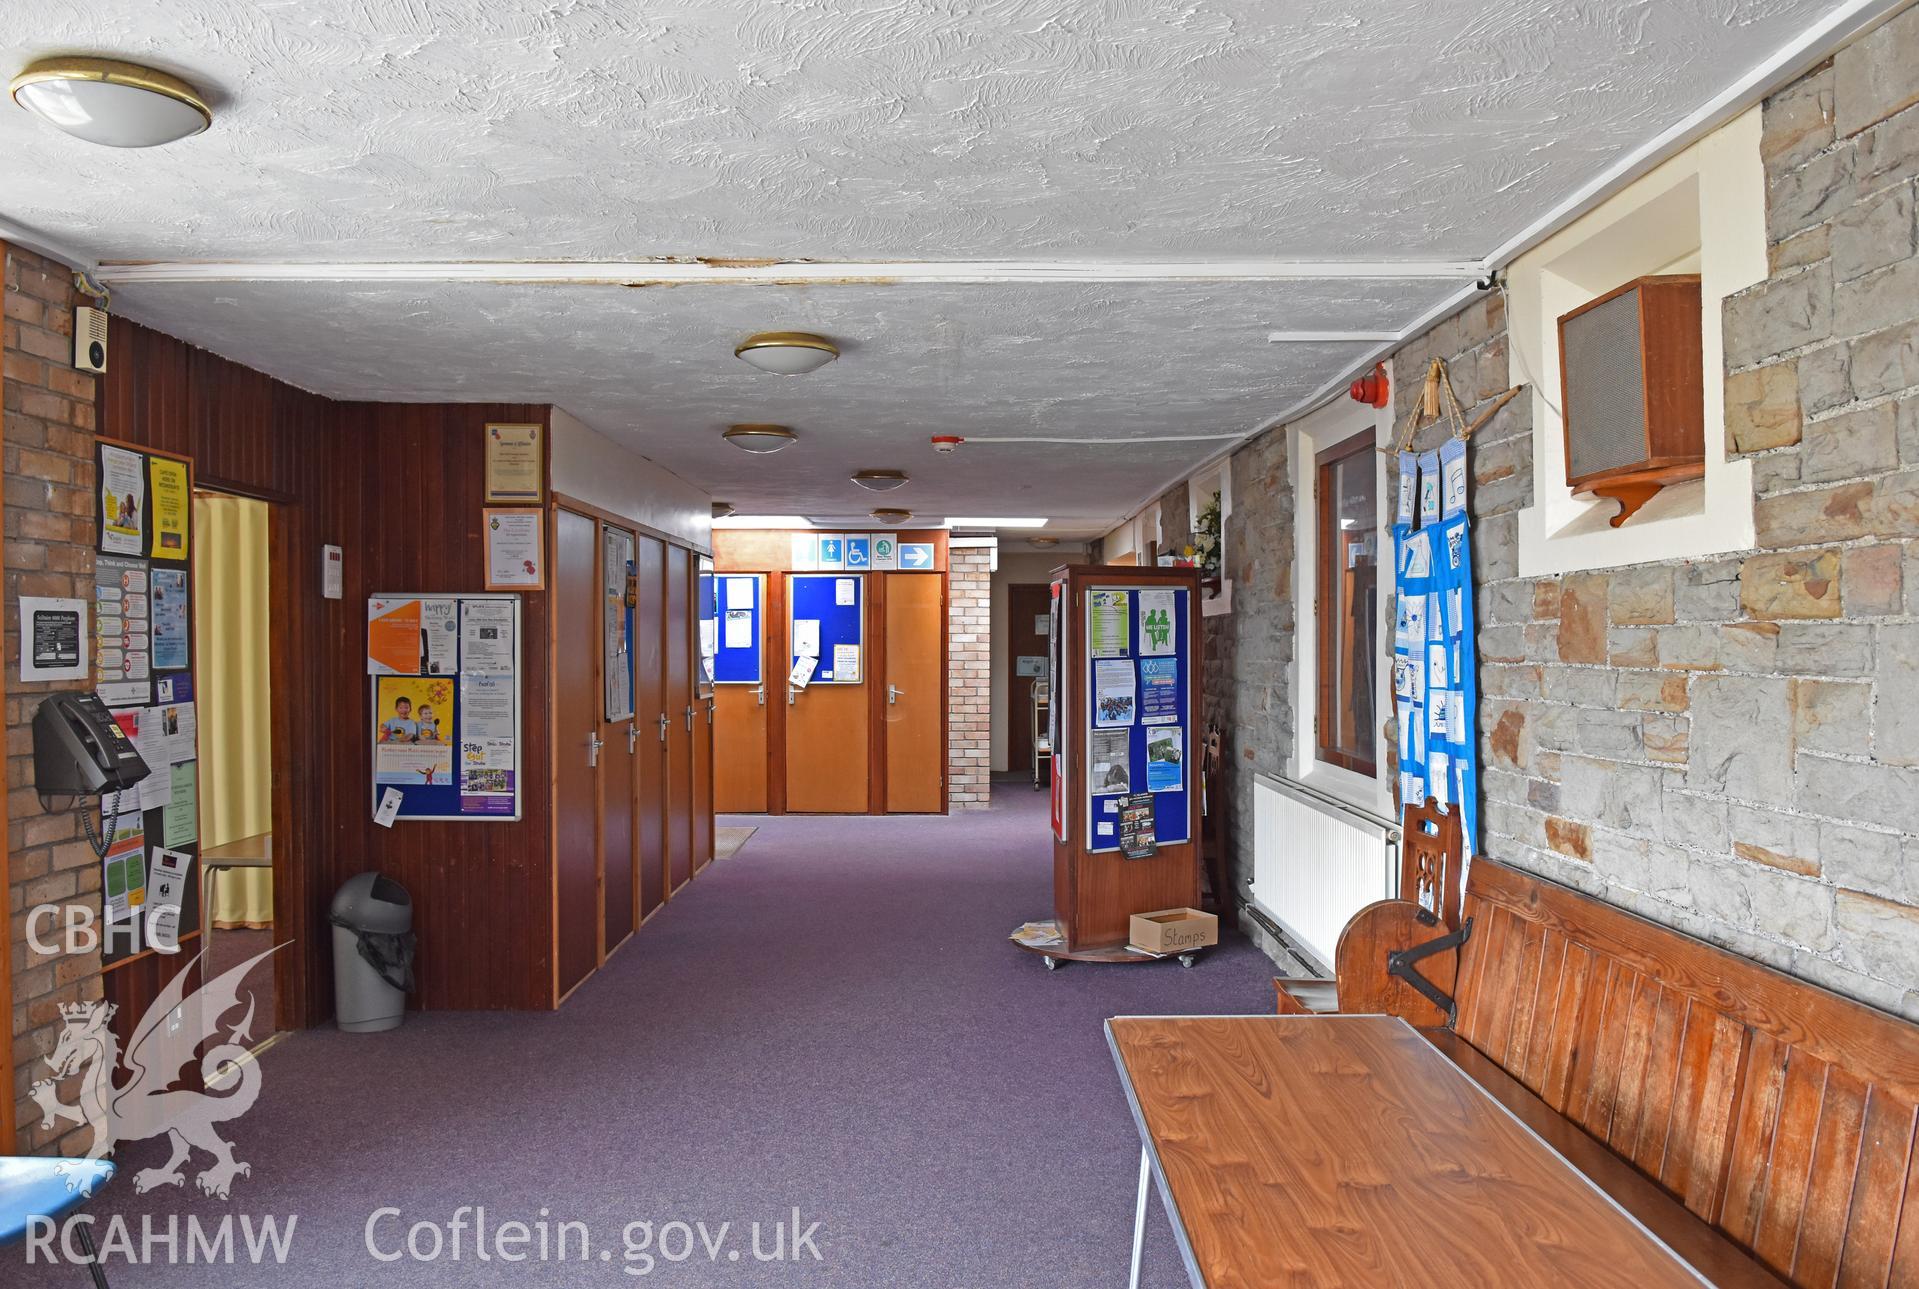 Colour photograph showing interior view of foyer at English Wesleyan Methodist Chapel, Porthcawl, taken during photographic survey conducted by Sue Fielding on 12th May 2018.